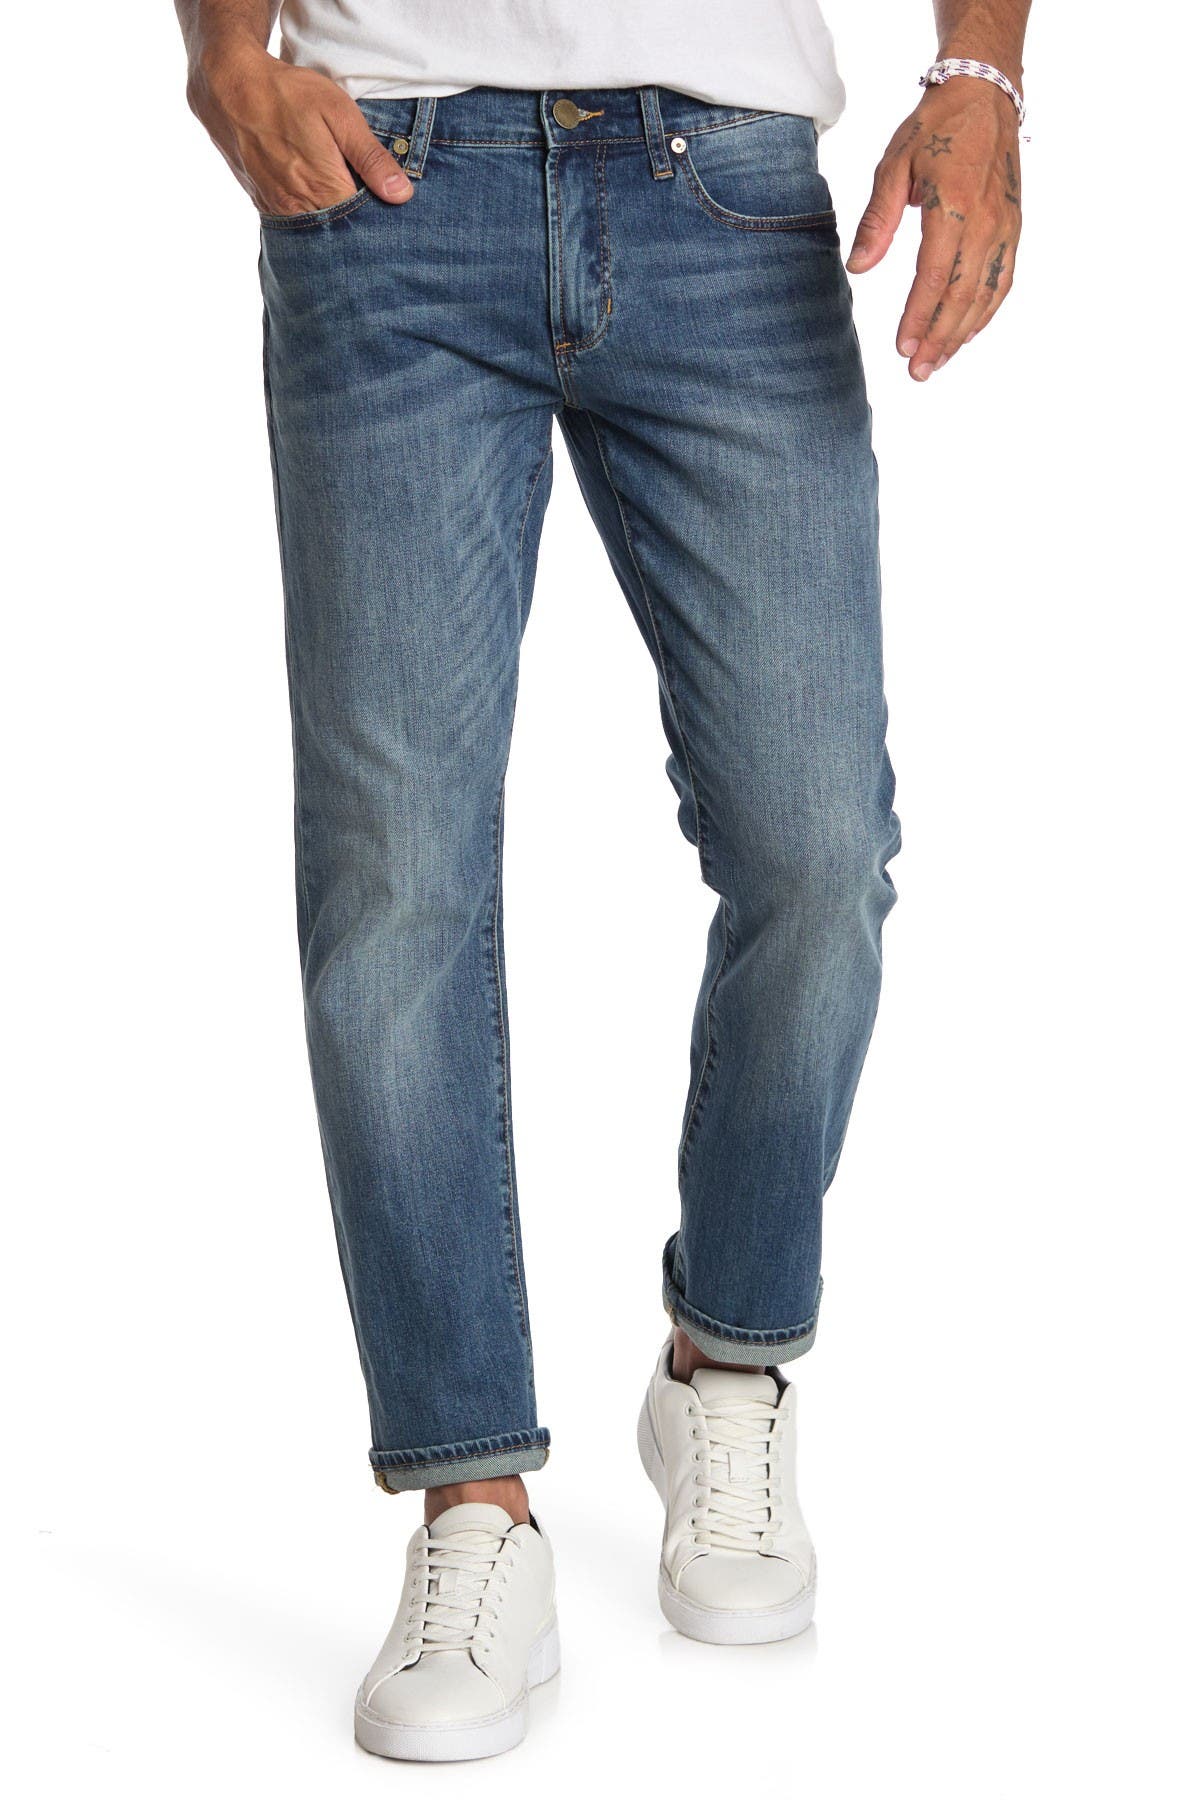 nordstrom rack articles of society jeans